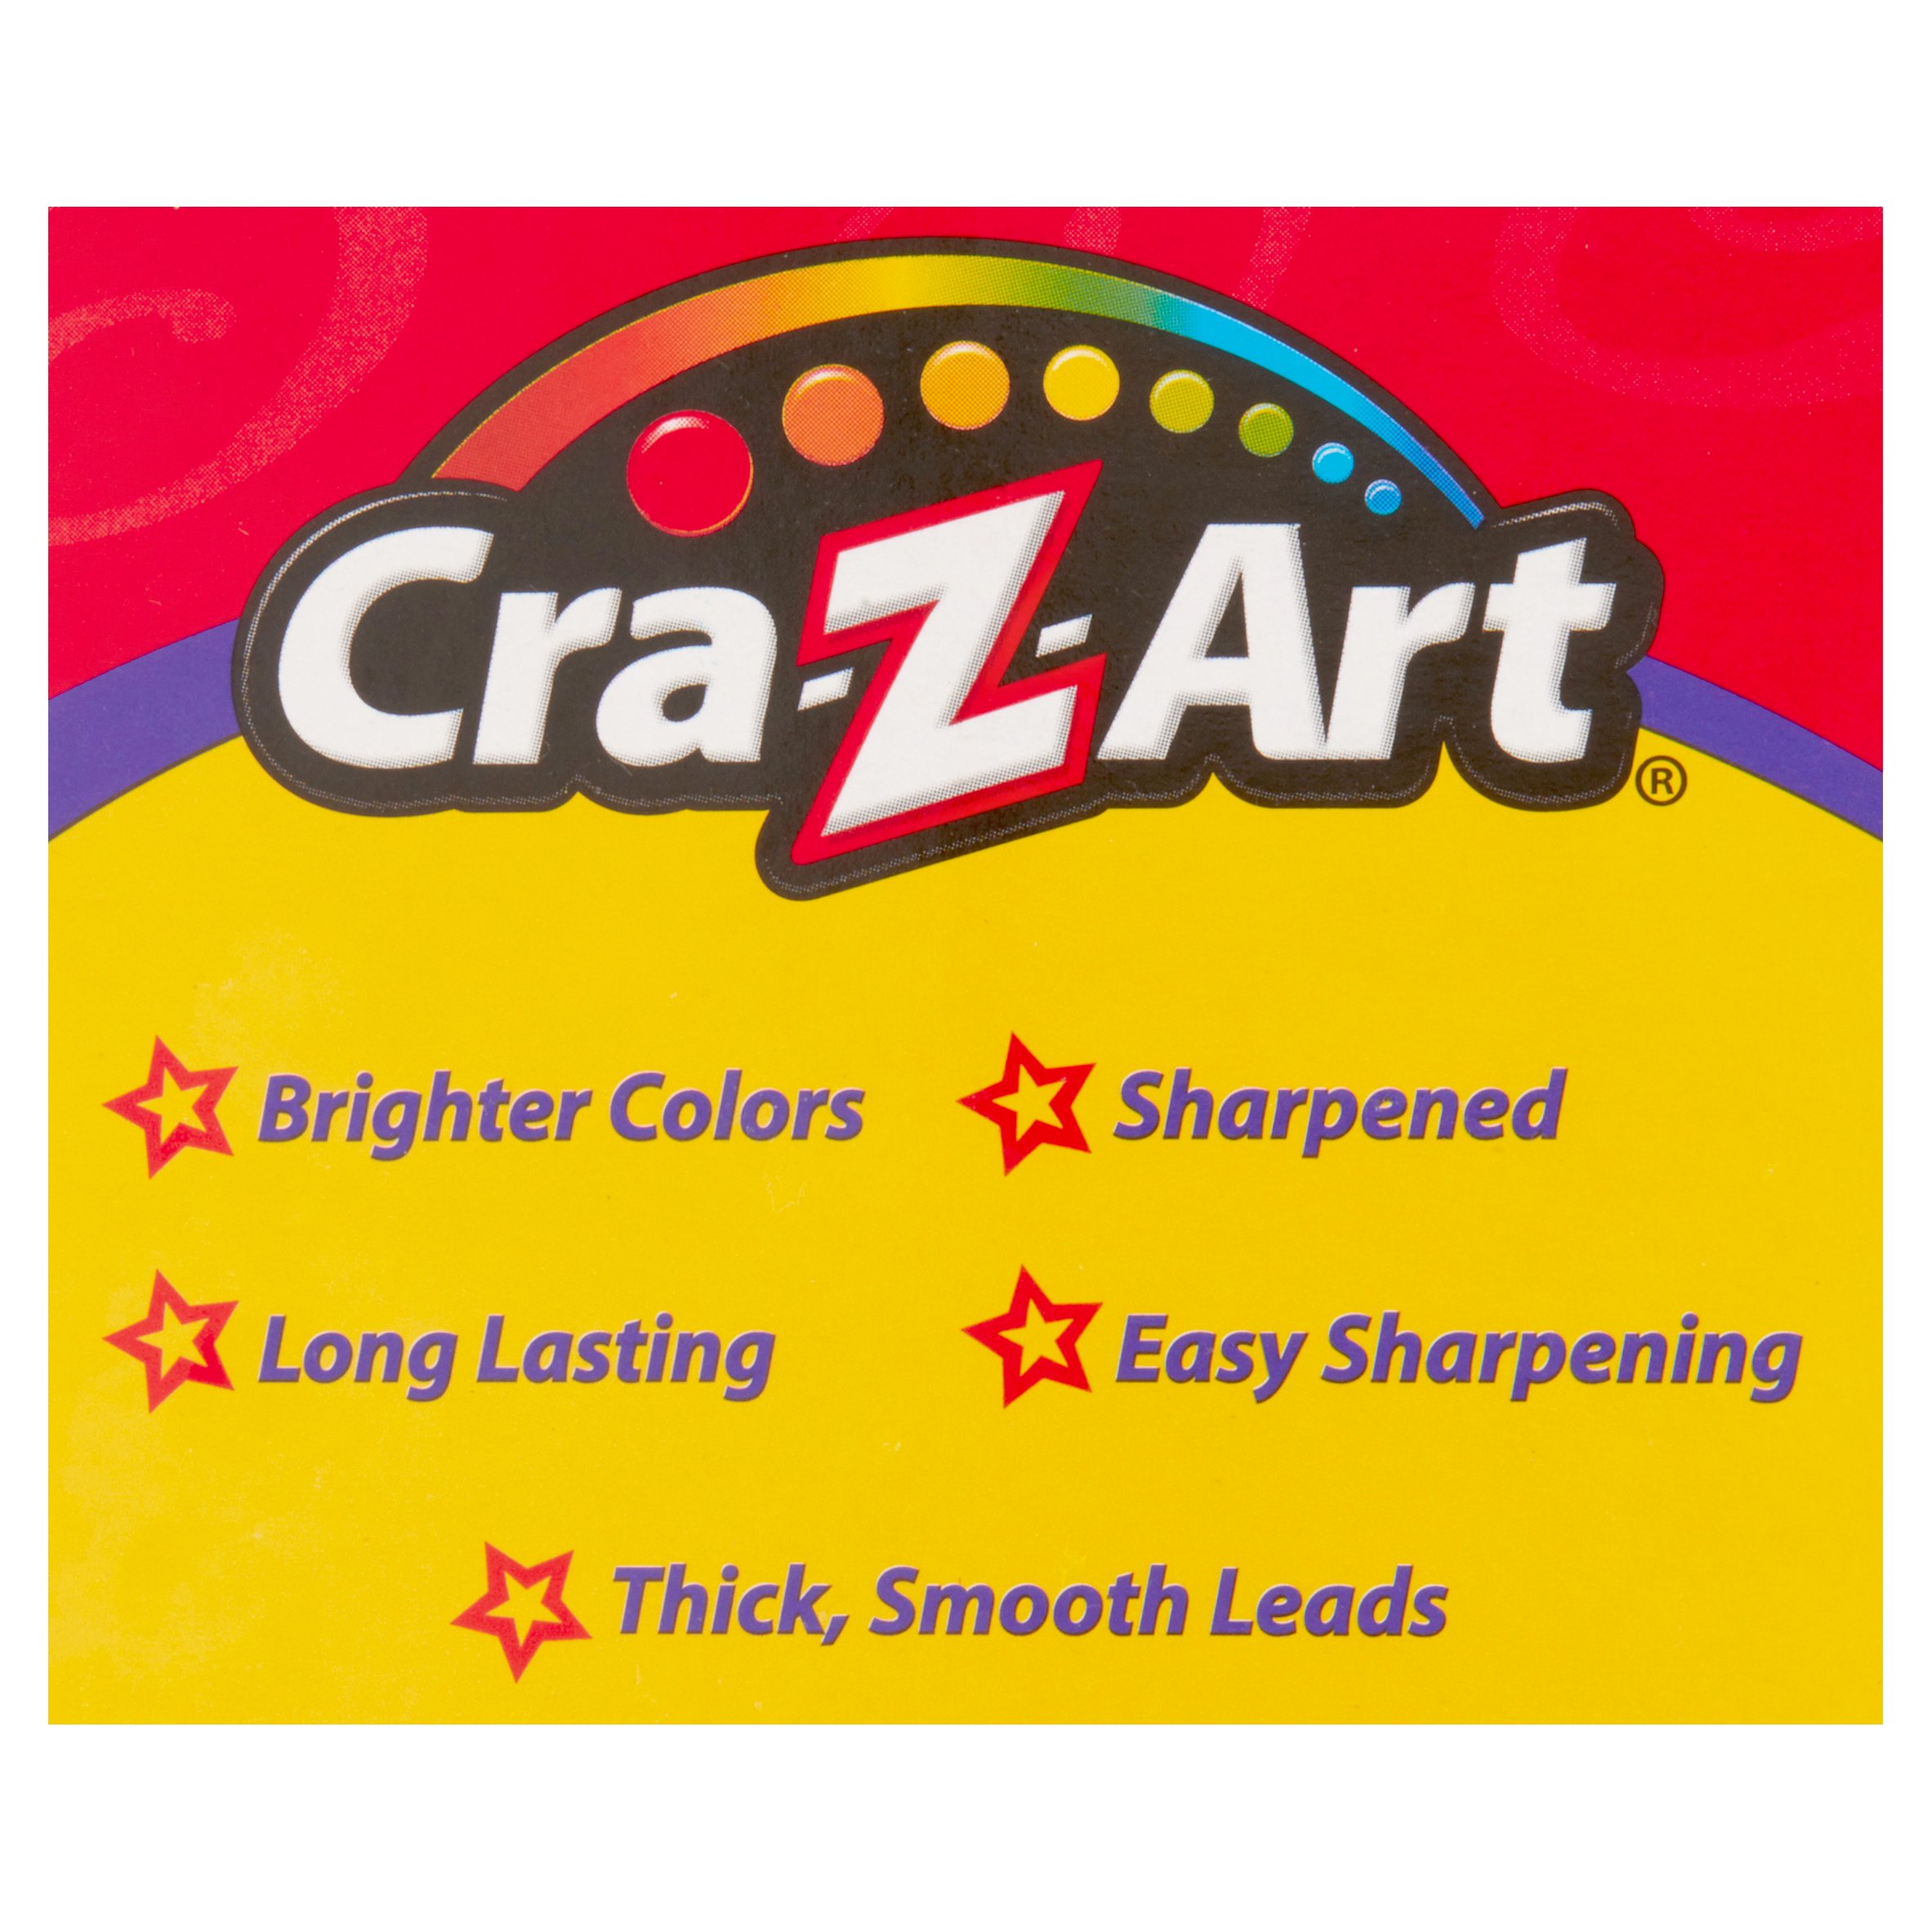 Cra-Z-Art Colored Pencils, 12 Count, Beginner Child to Adult, Back to School Supplies - image 4 of 11